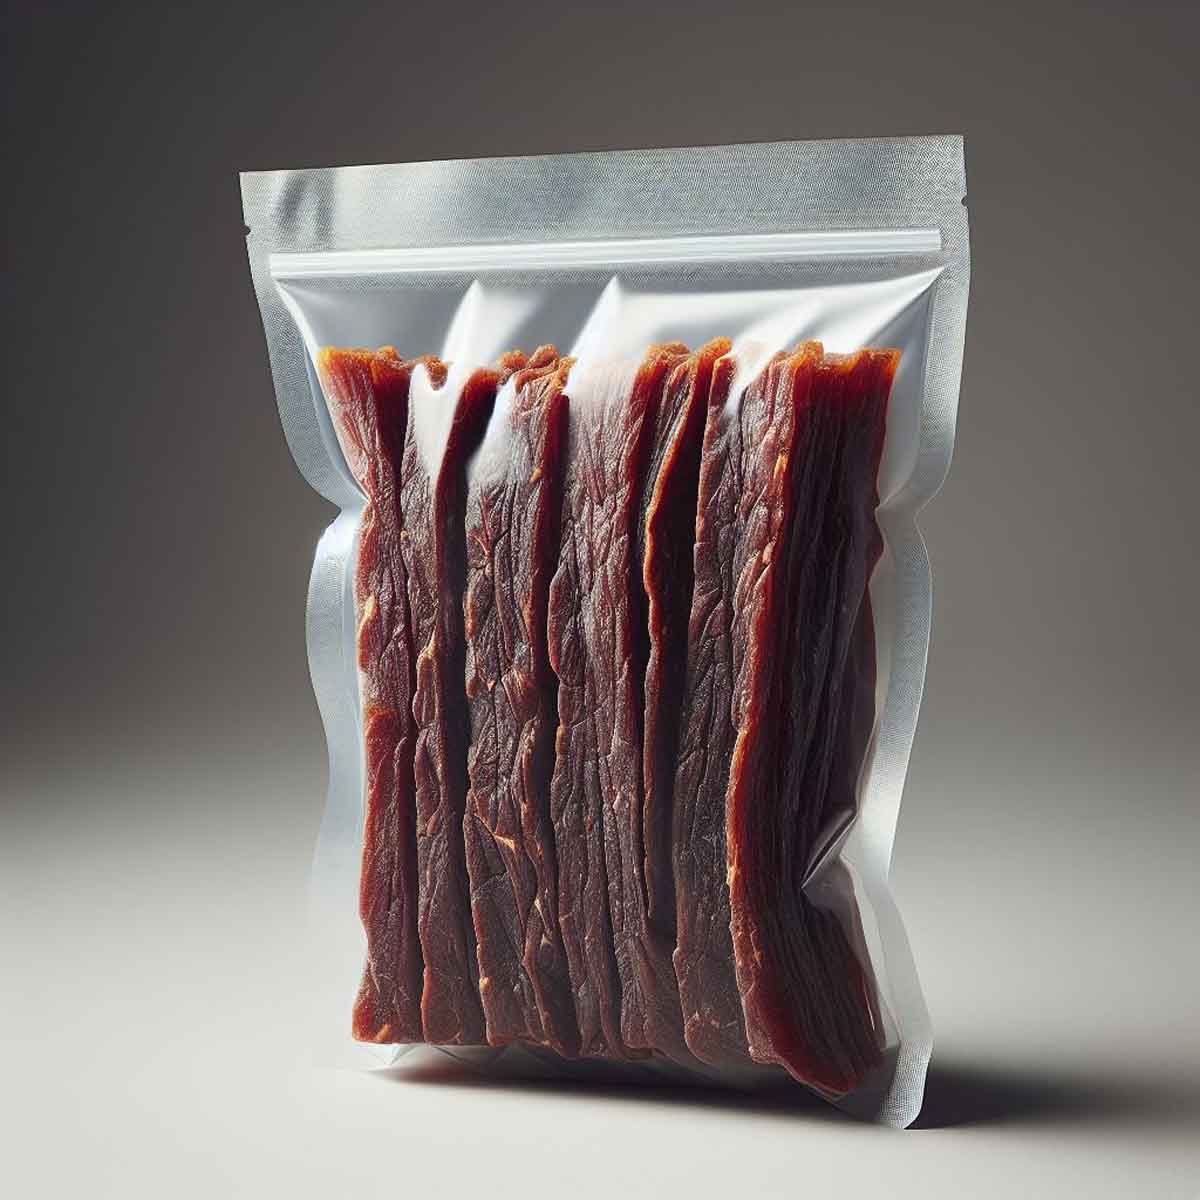 How to store beef jerky? Beef jerky tightly packed in vacuum-sealed bags for extended shelf life.